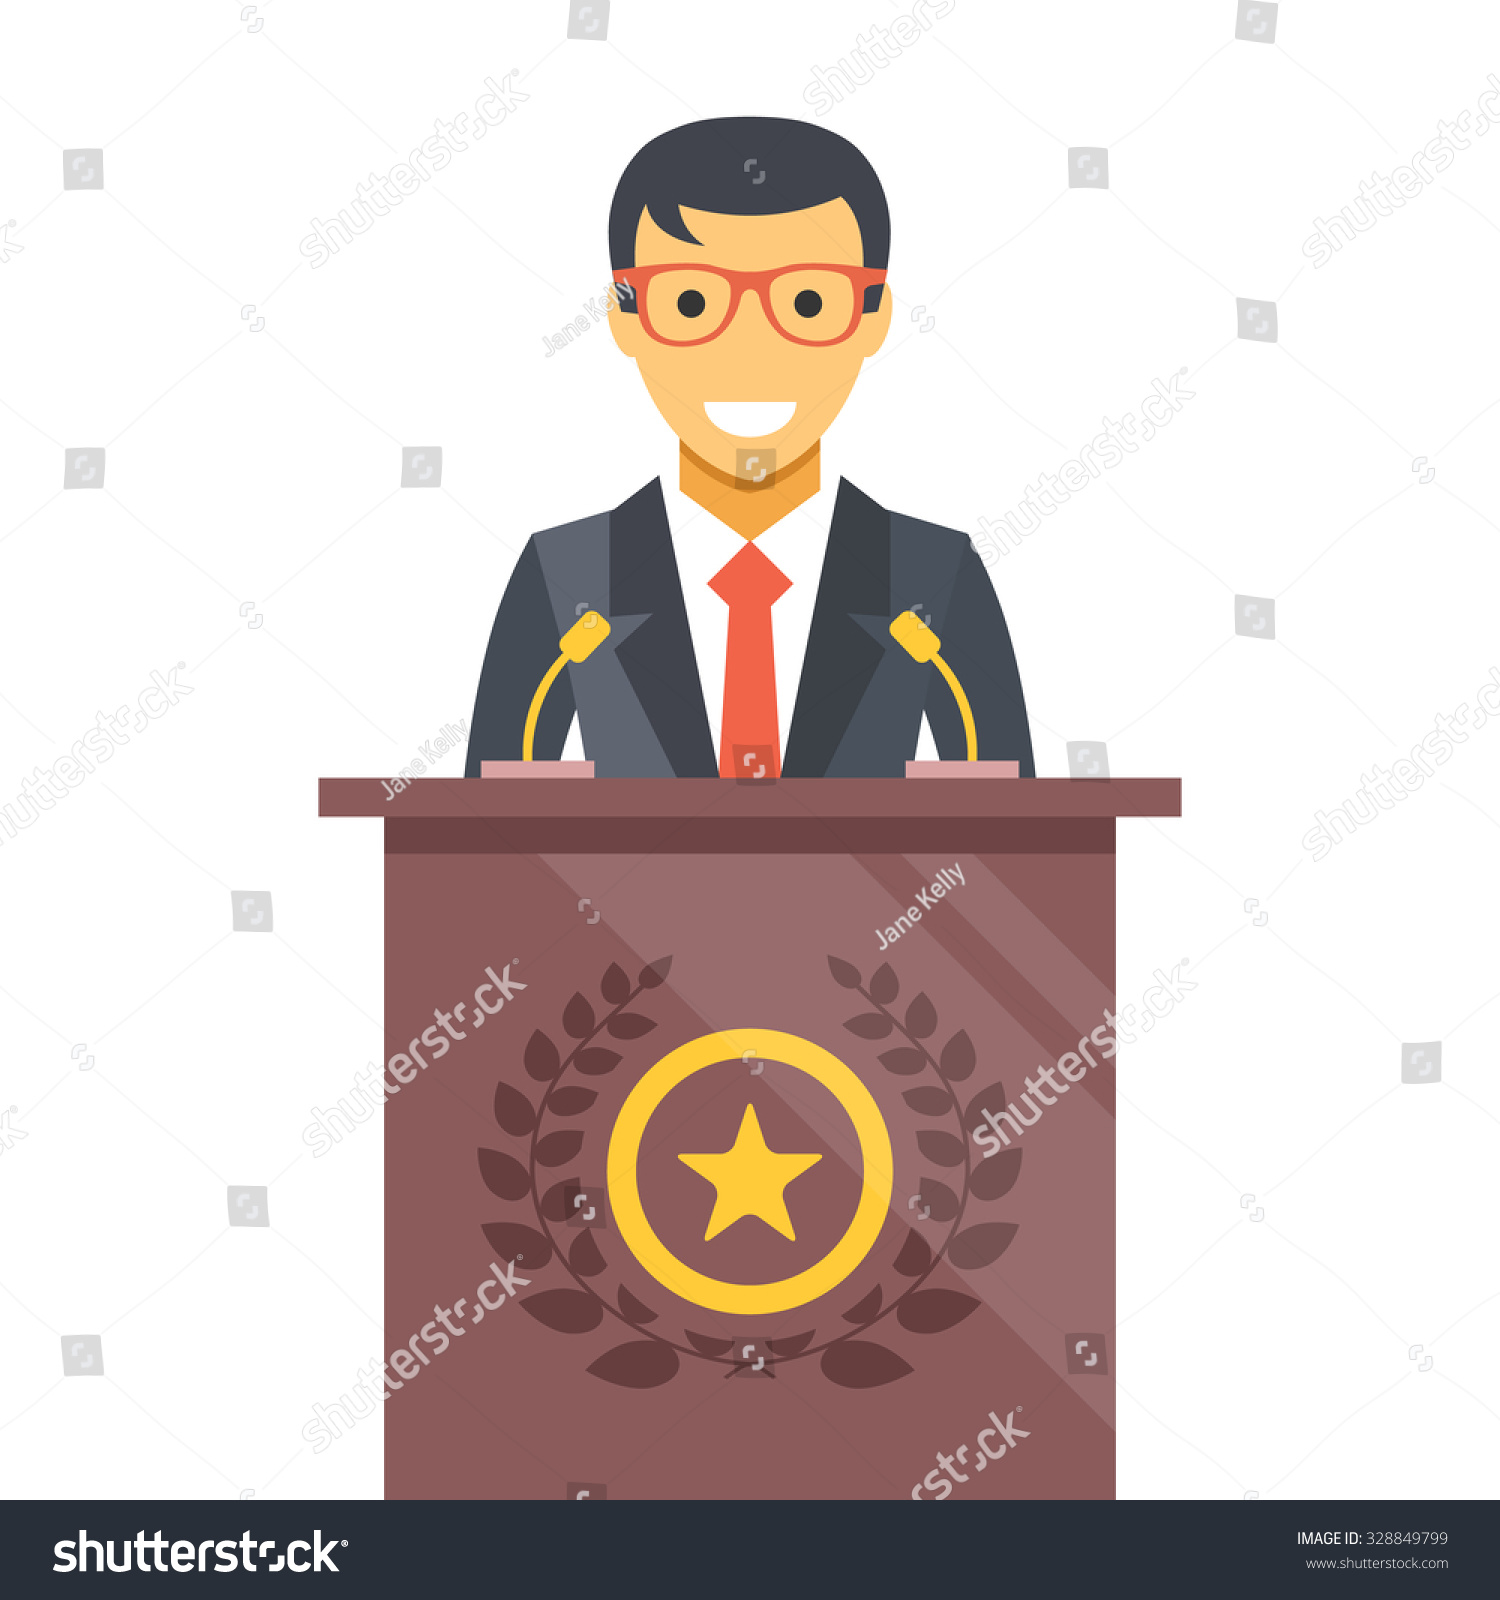 stock vector speaker at podium man in suit standing at rostrum important event business conference concept 328849799